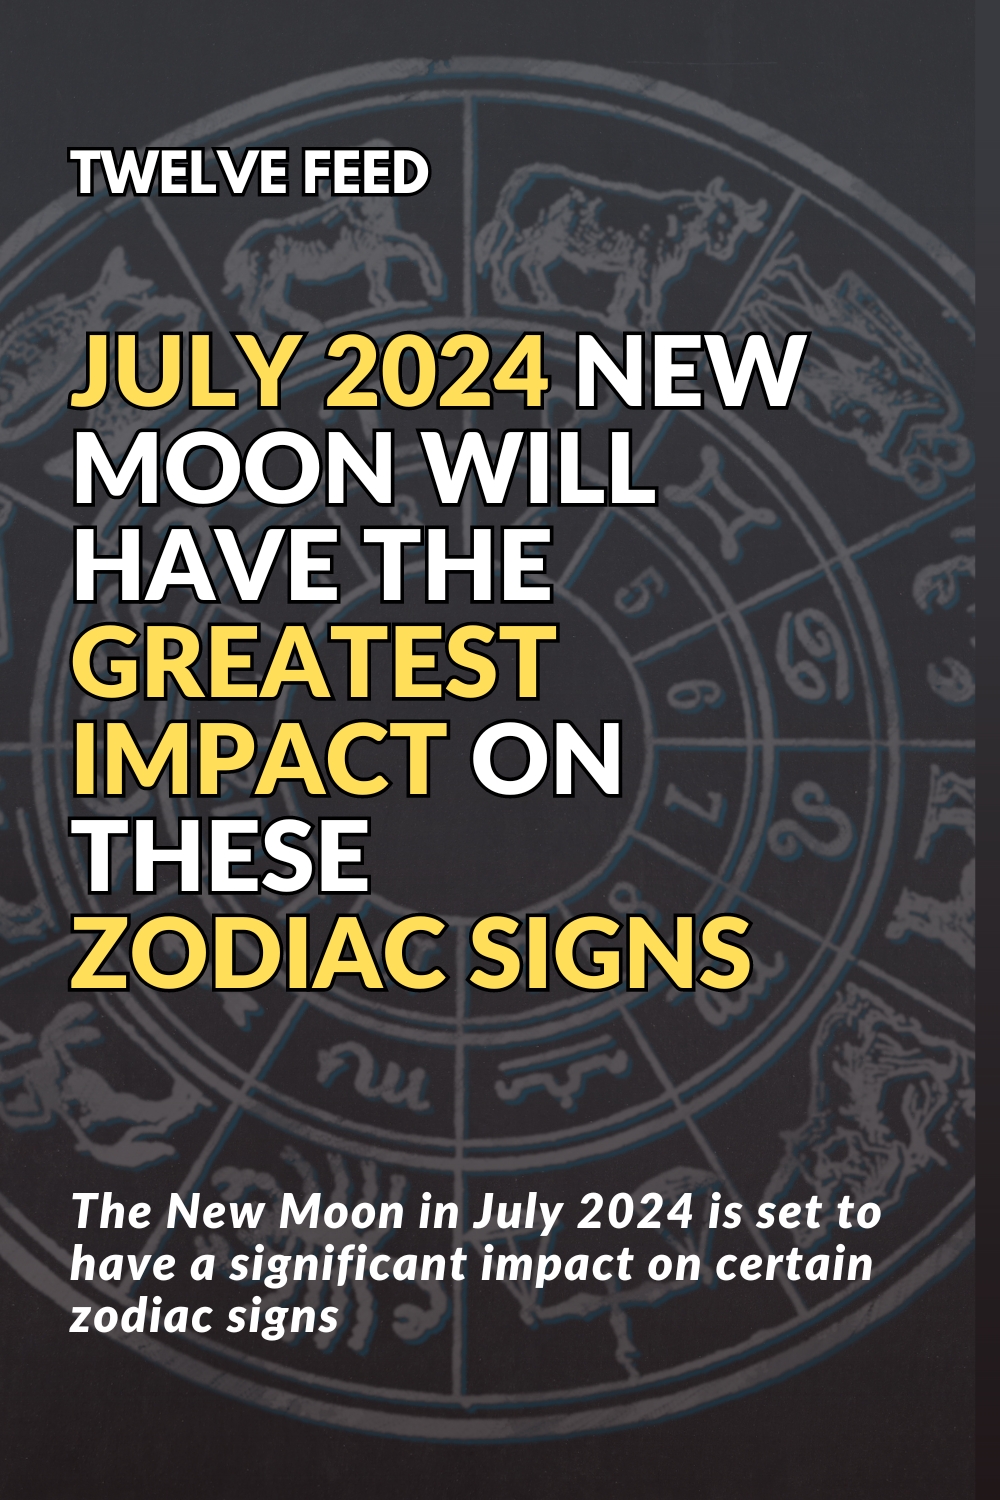 July 2024 New Moon Will Have The Greatest Impact On These Zodiac Signs